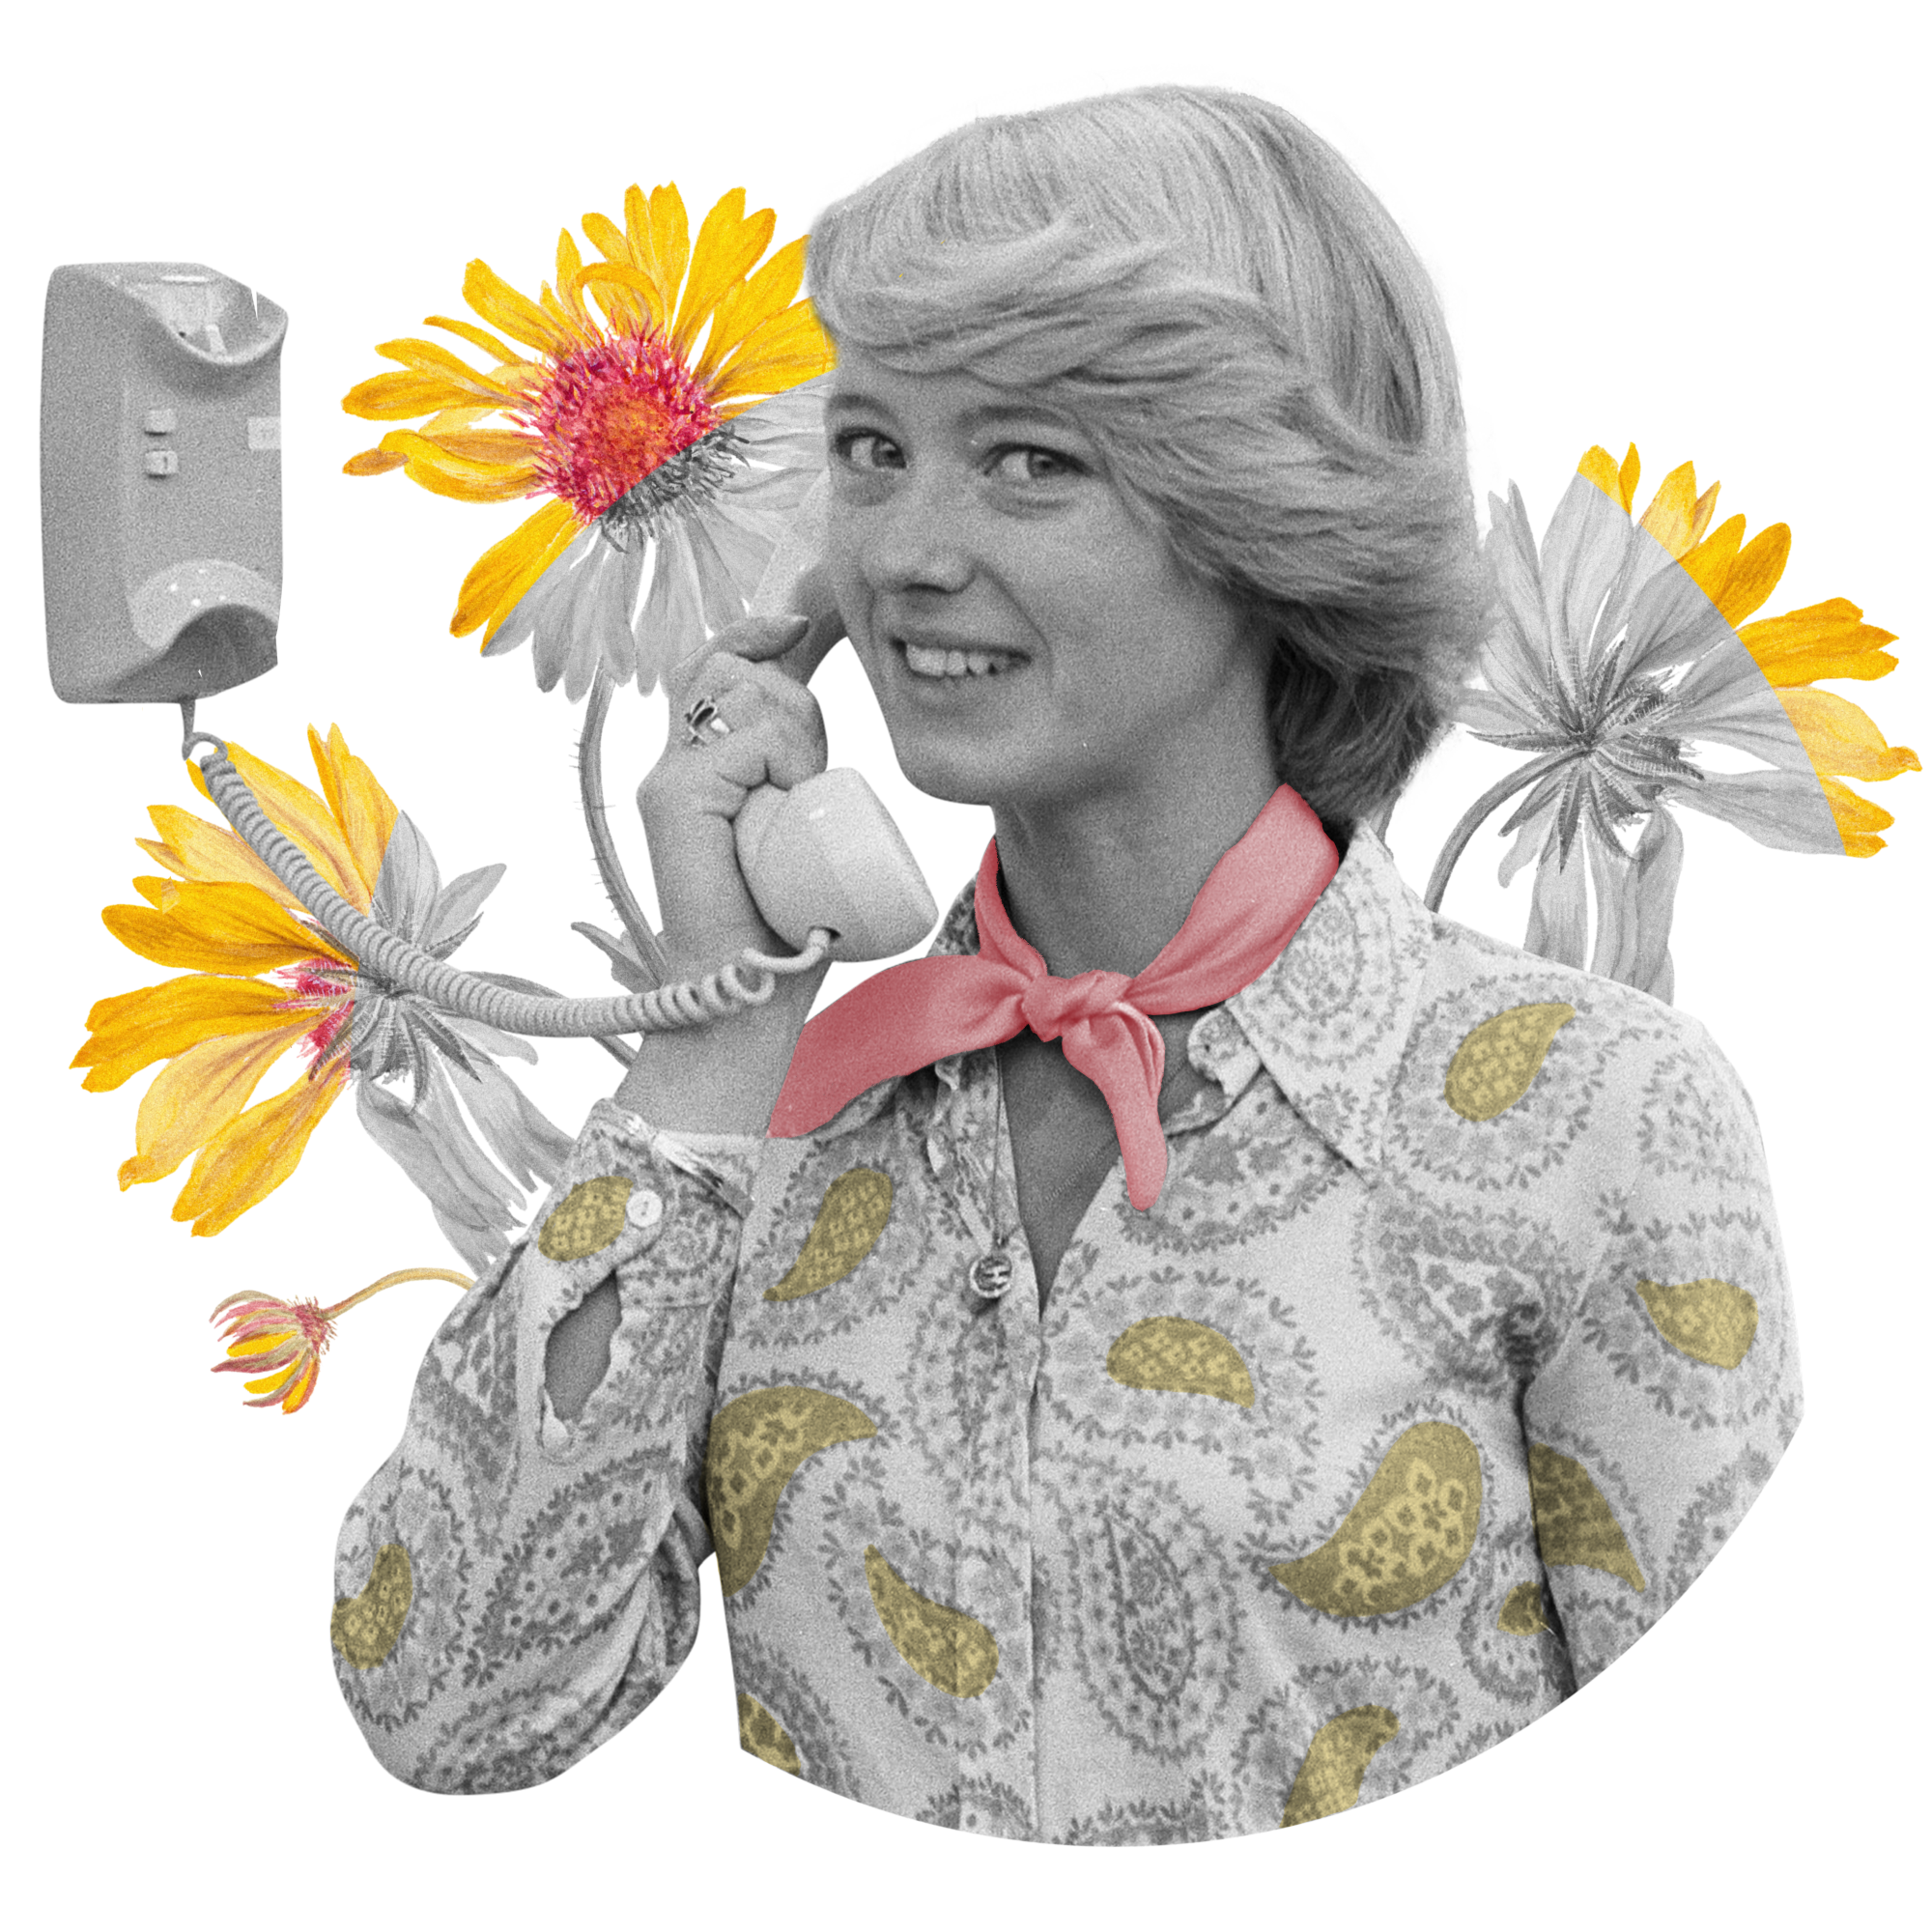 A collage image using a 1970' image of a woman speaking on a phone mounted to the wall. She is wearing a paisley blouse and neck scarf. She is surrounded by yellow illustrated flowers. Image is by bakkehus.com.au